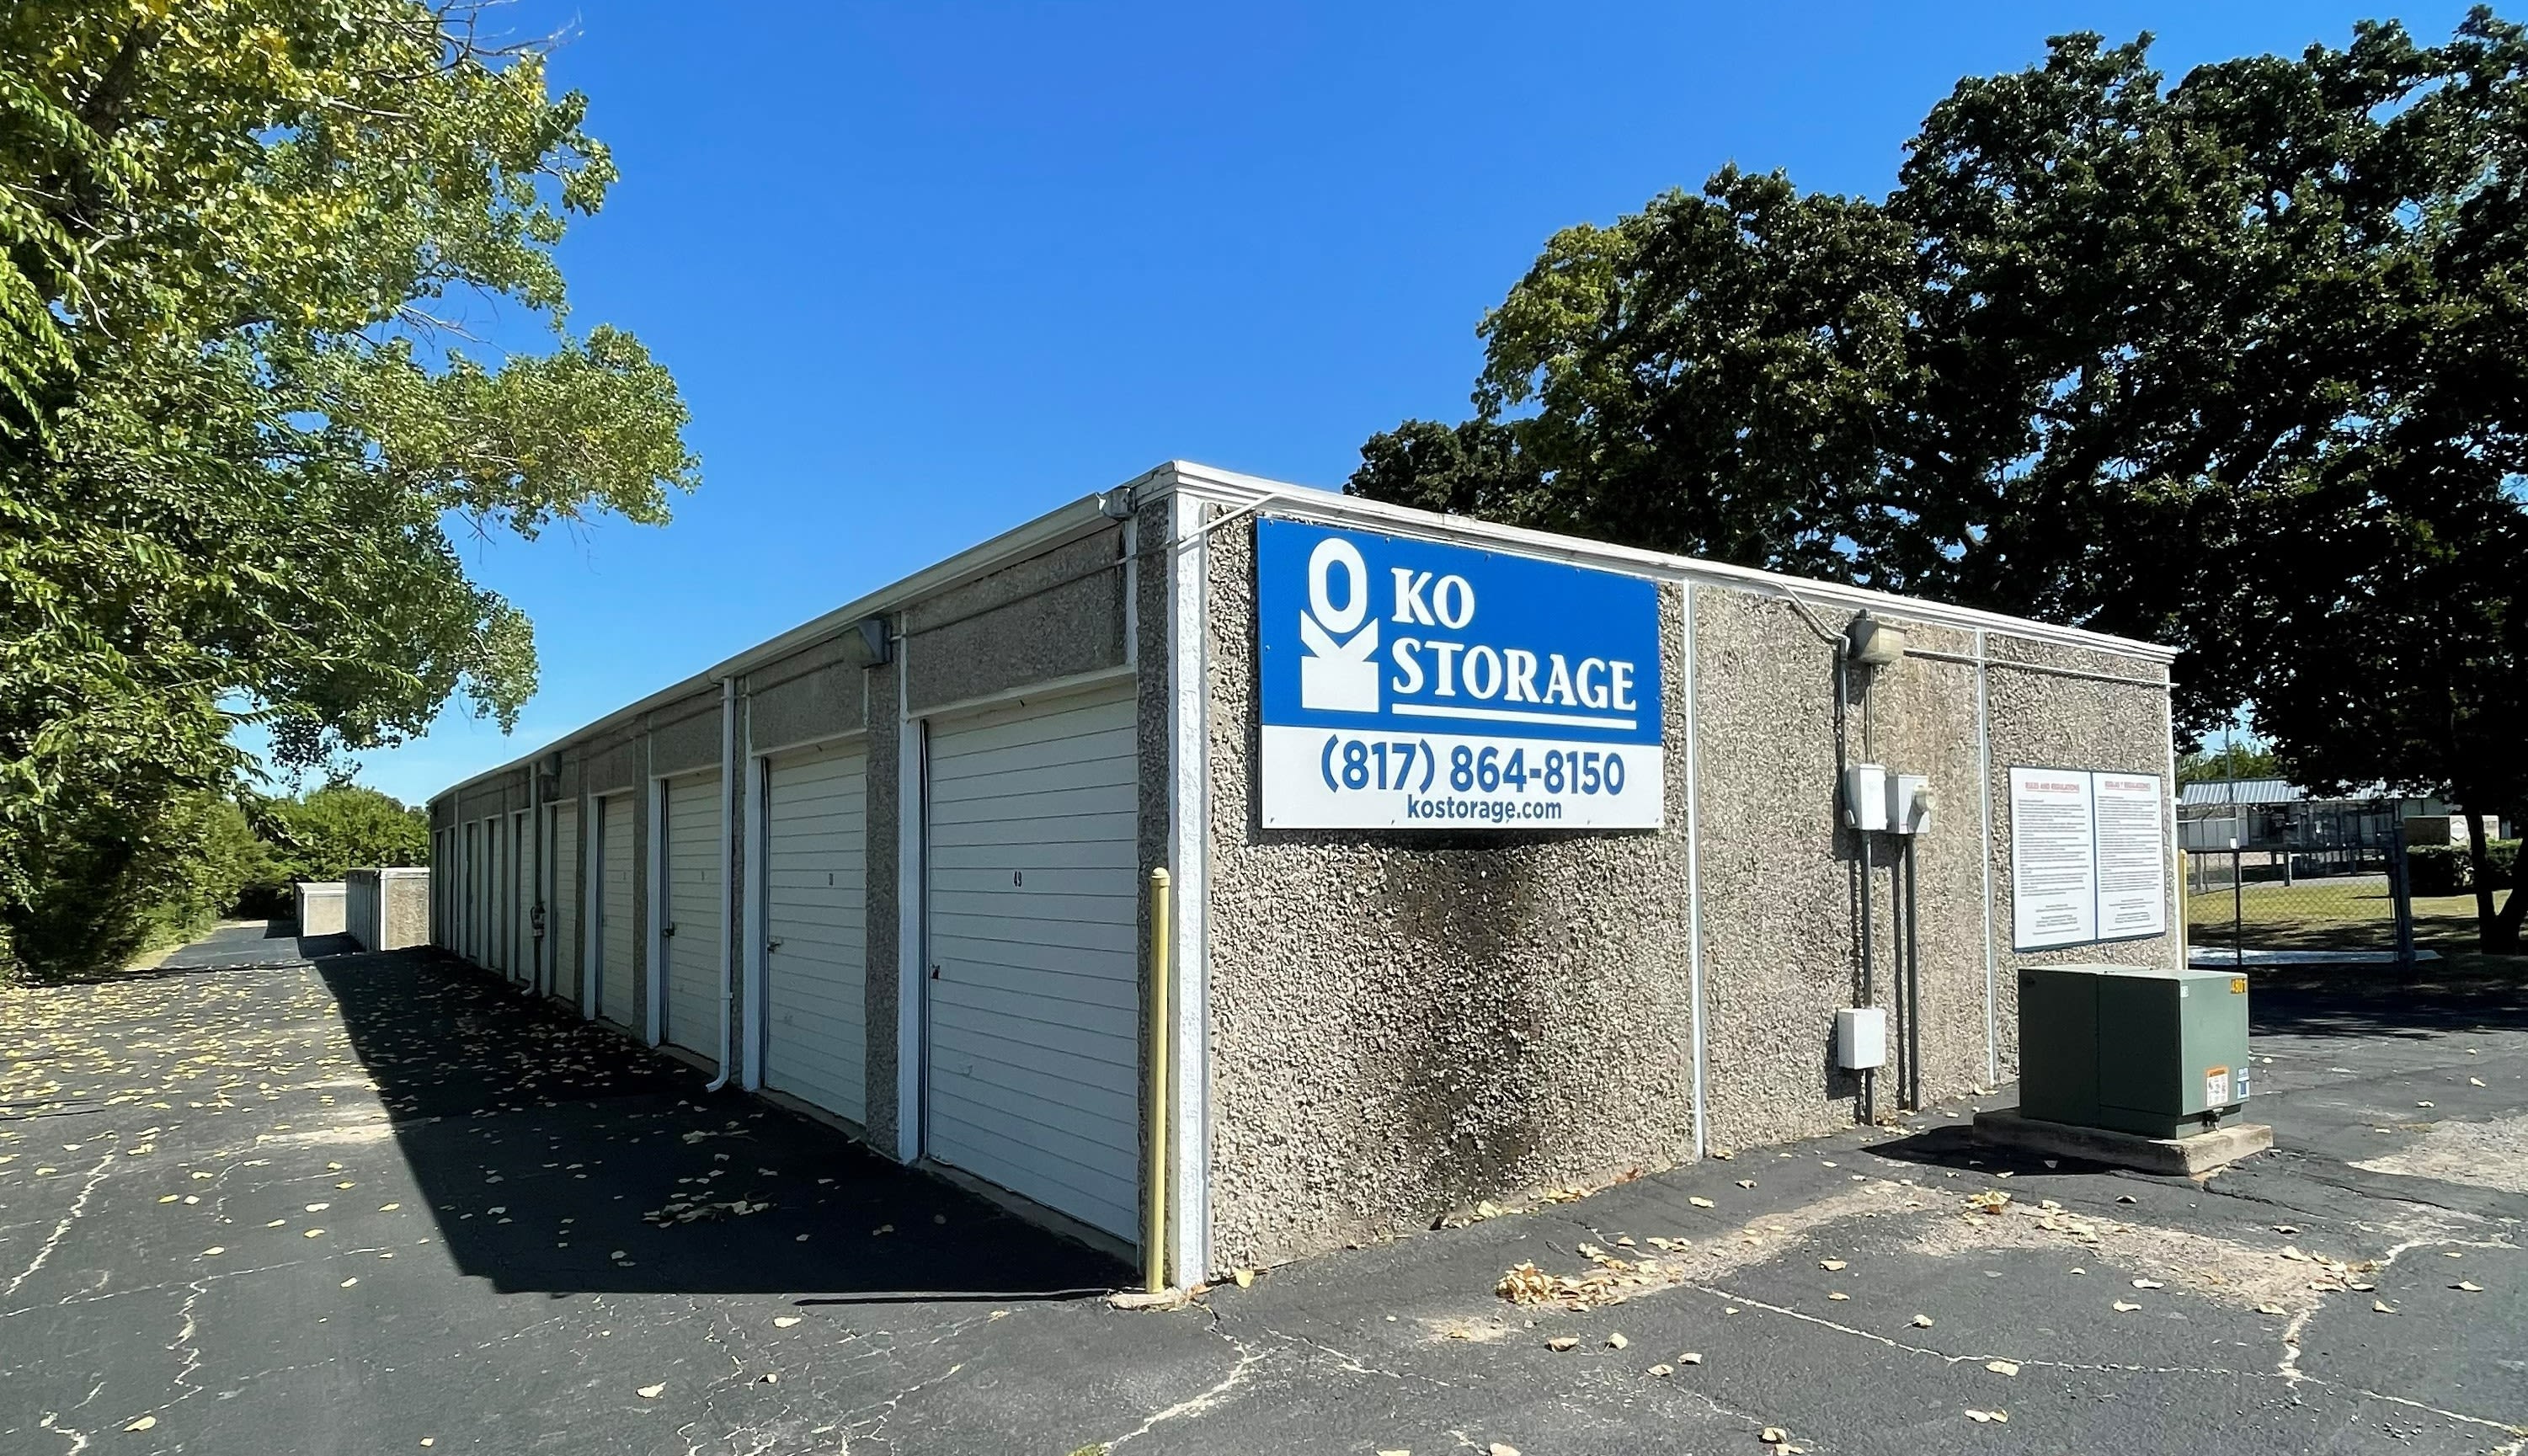 Contact KO Storage in Weatherford, Texas